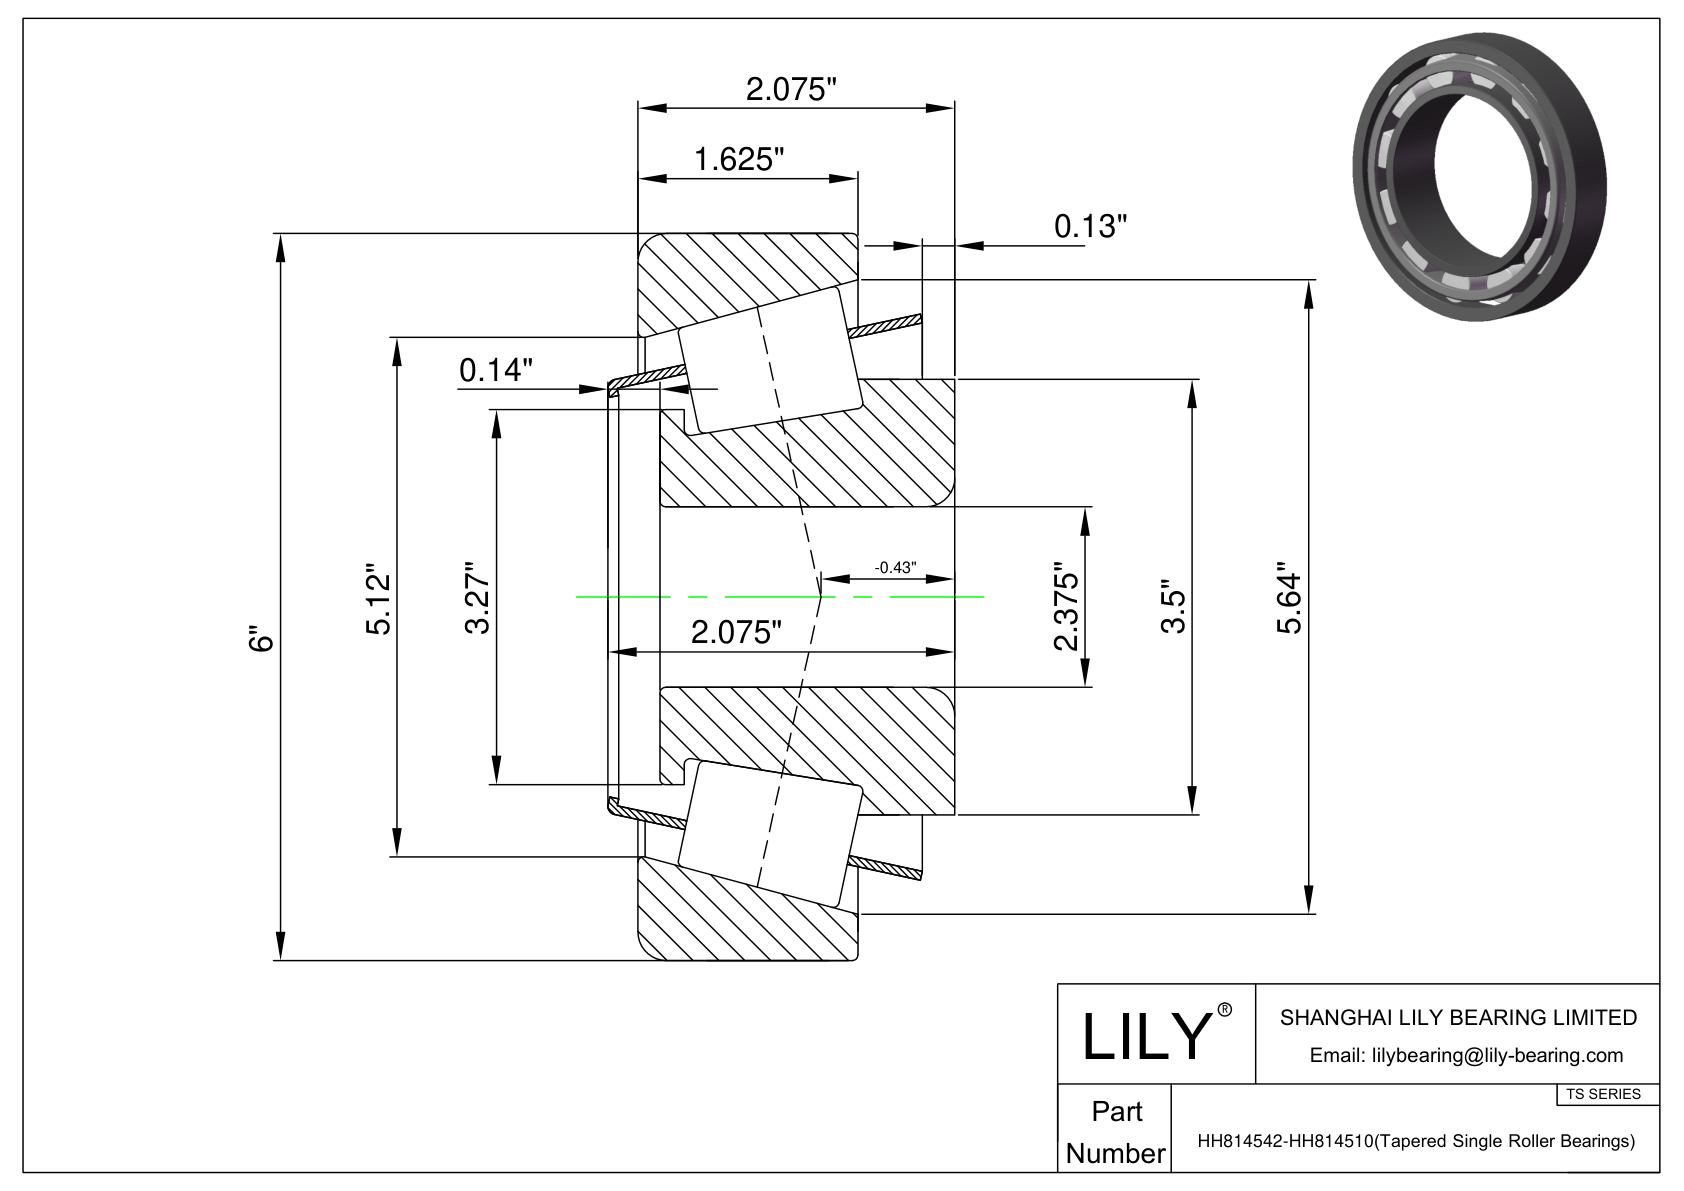 HH814542-HH814510 TS (Tapered Single Roller Bearings) (Imperial) cad drawing